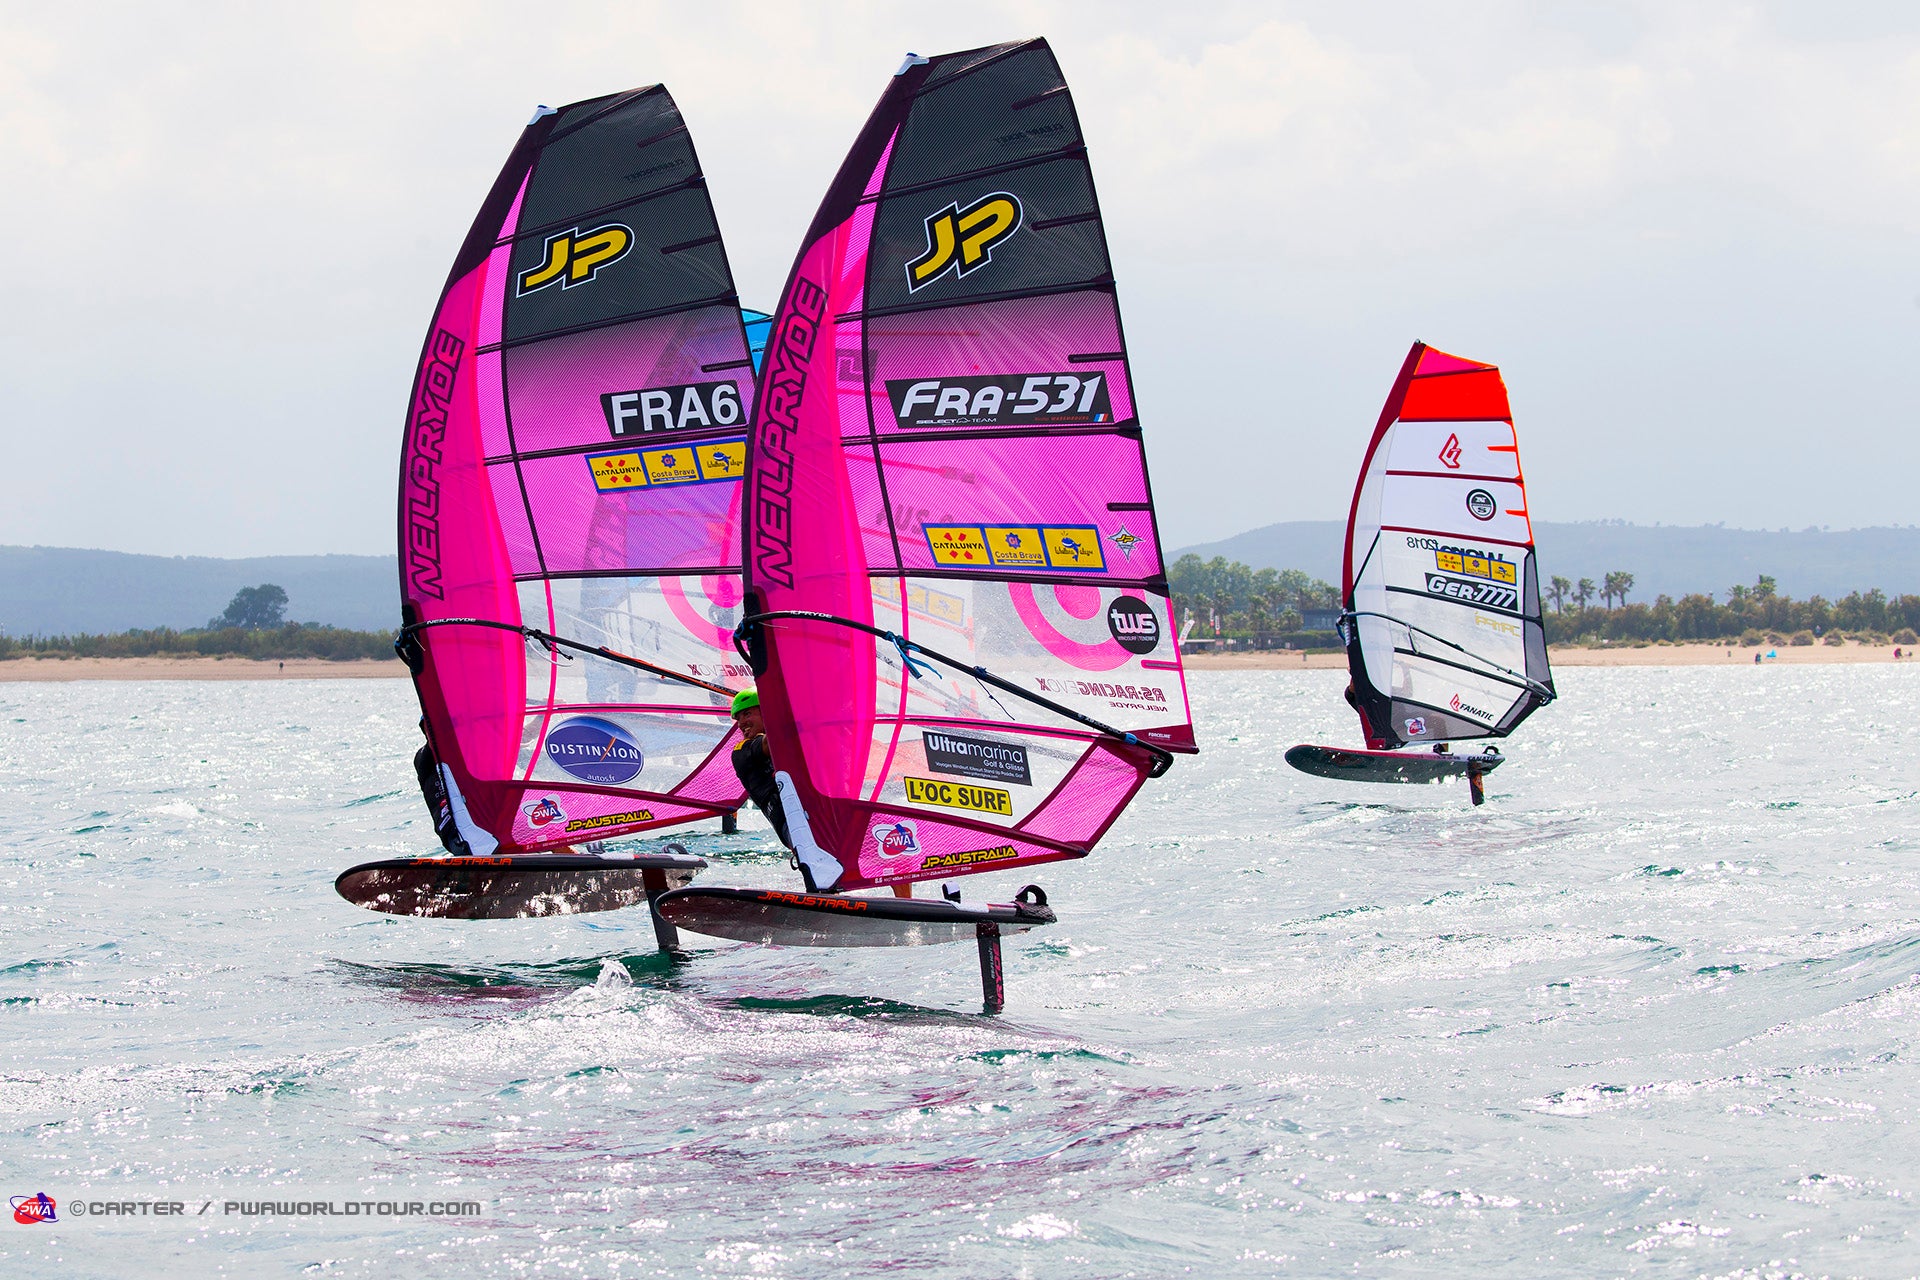 RS:RACING EVOX DOMINATES SLALOM AND BONTEMPS RECORDS HIS FIRST FOILING PODIUM  IN COSTA BRAVA